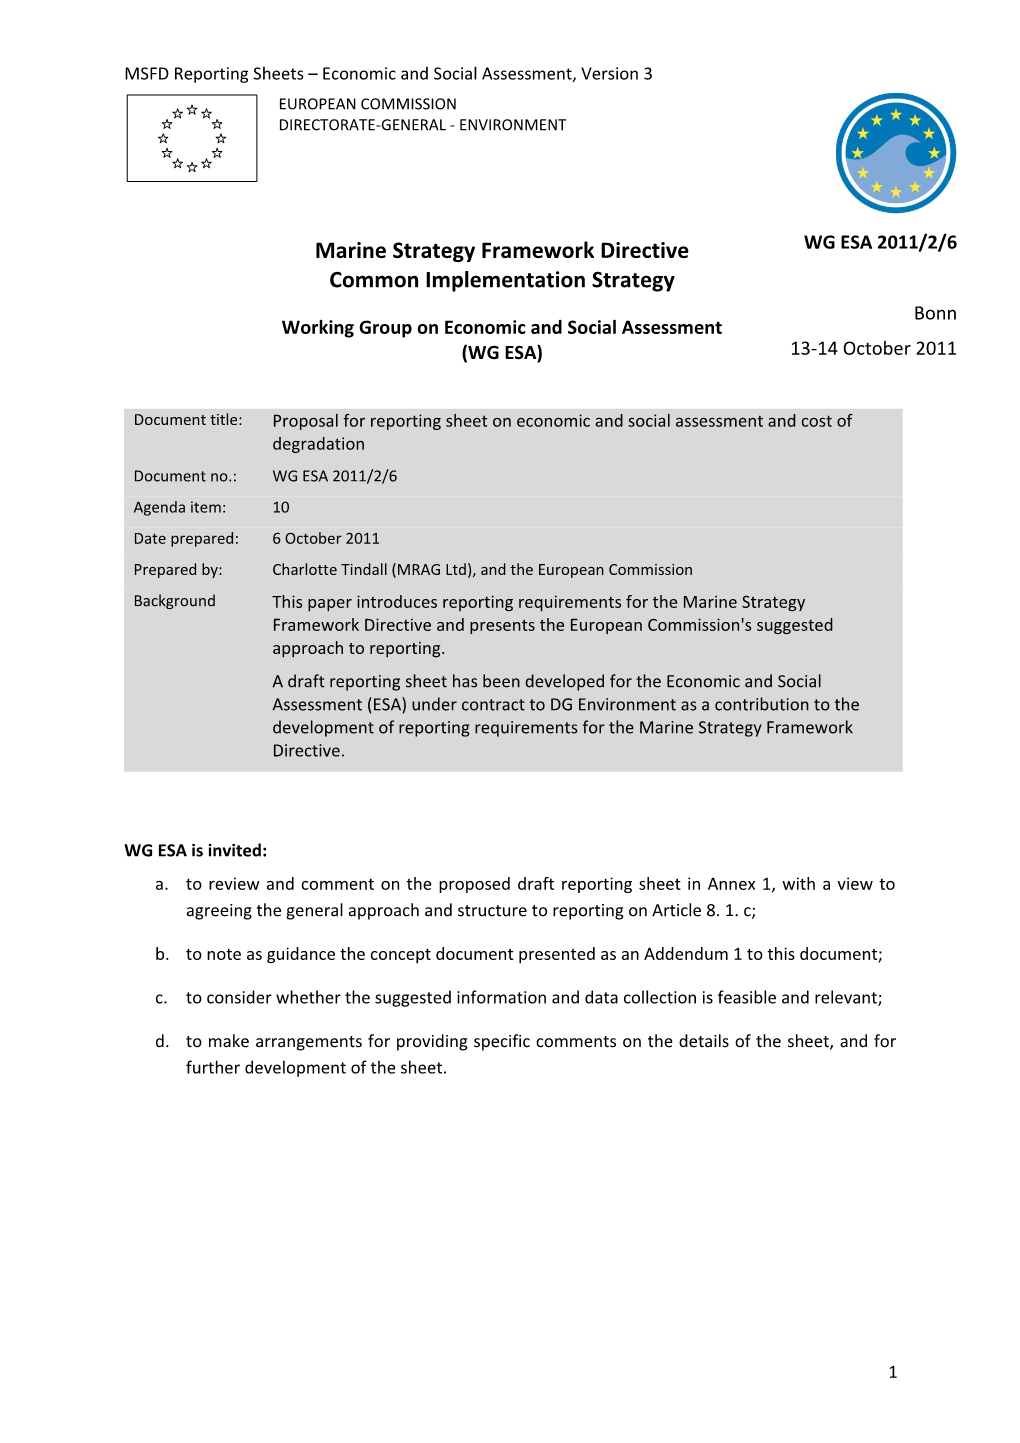 MSFD Reporting Sheets Economic and Social Assessment, Version 3